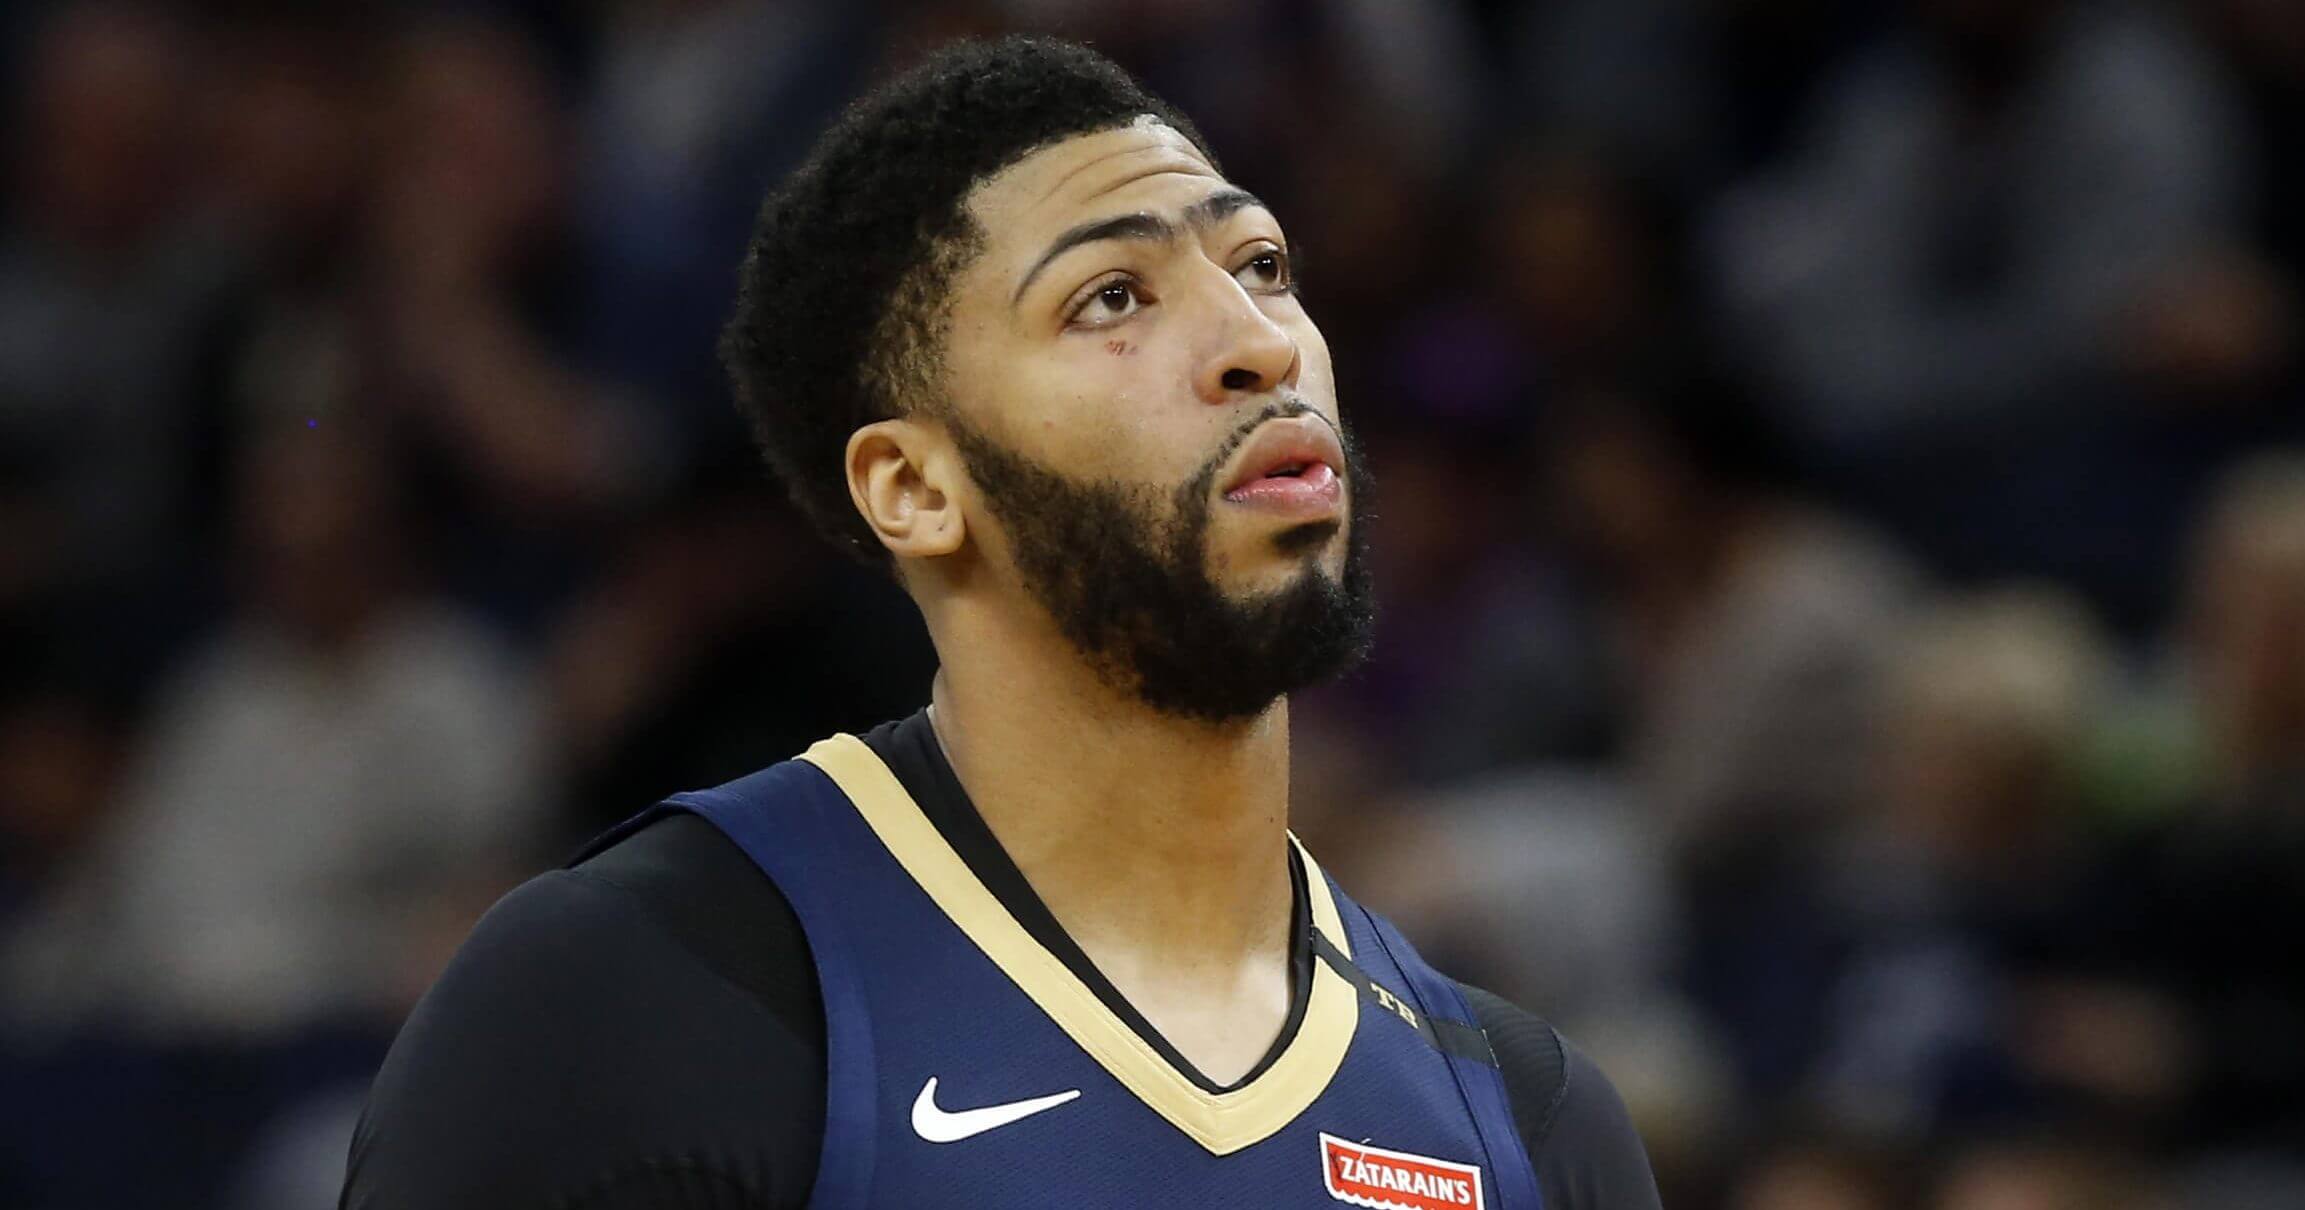 New Orleans Pelicans' Anthony Davis plays against the Minnesota Timberwolves in a Jan. 12 game in Minneapolis.